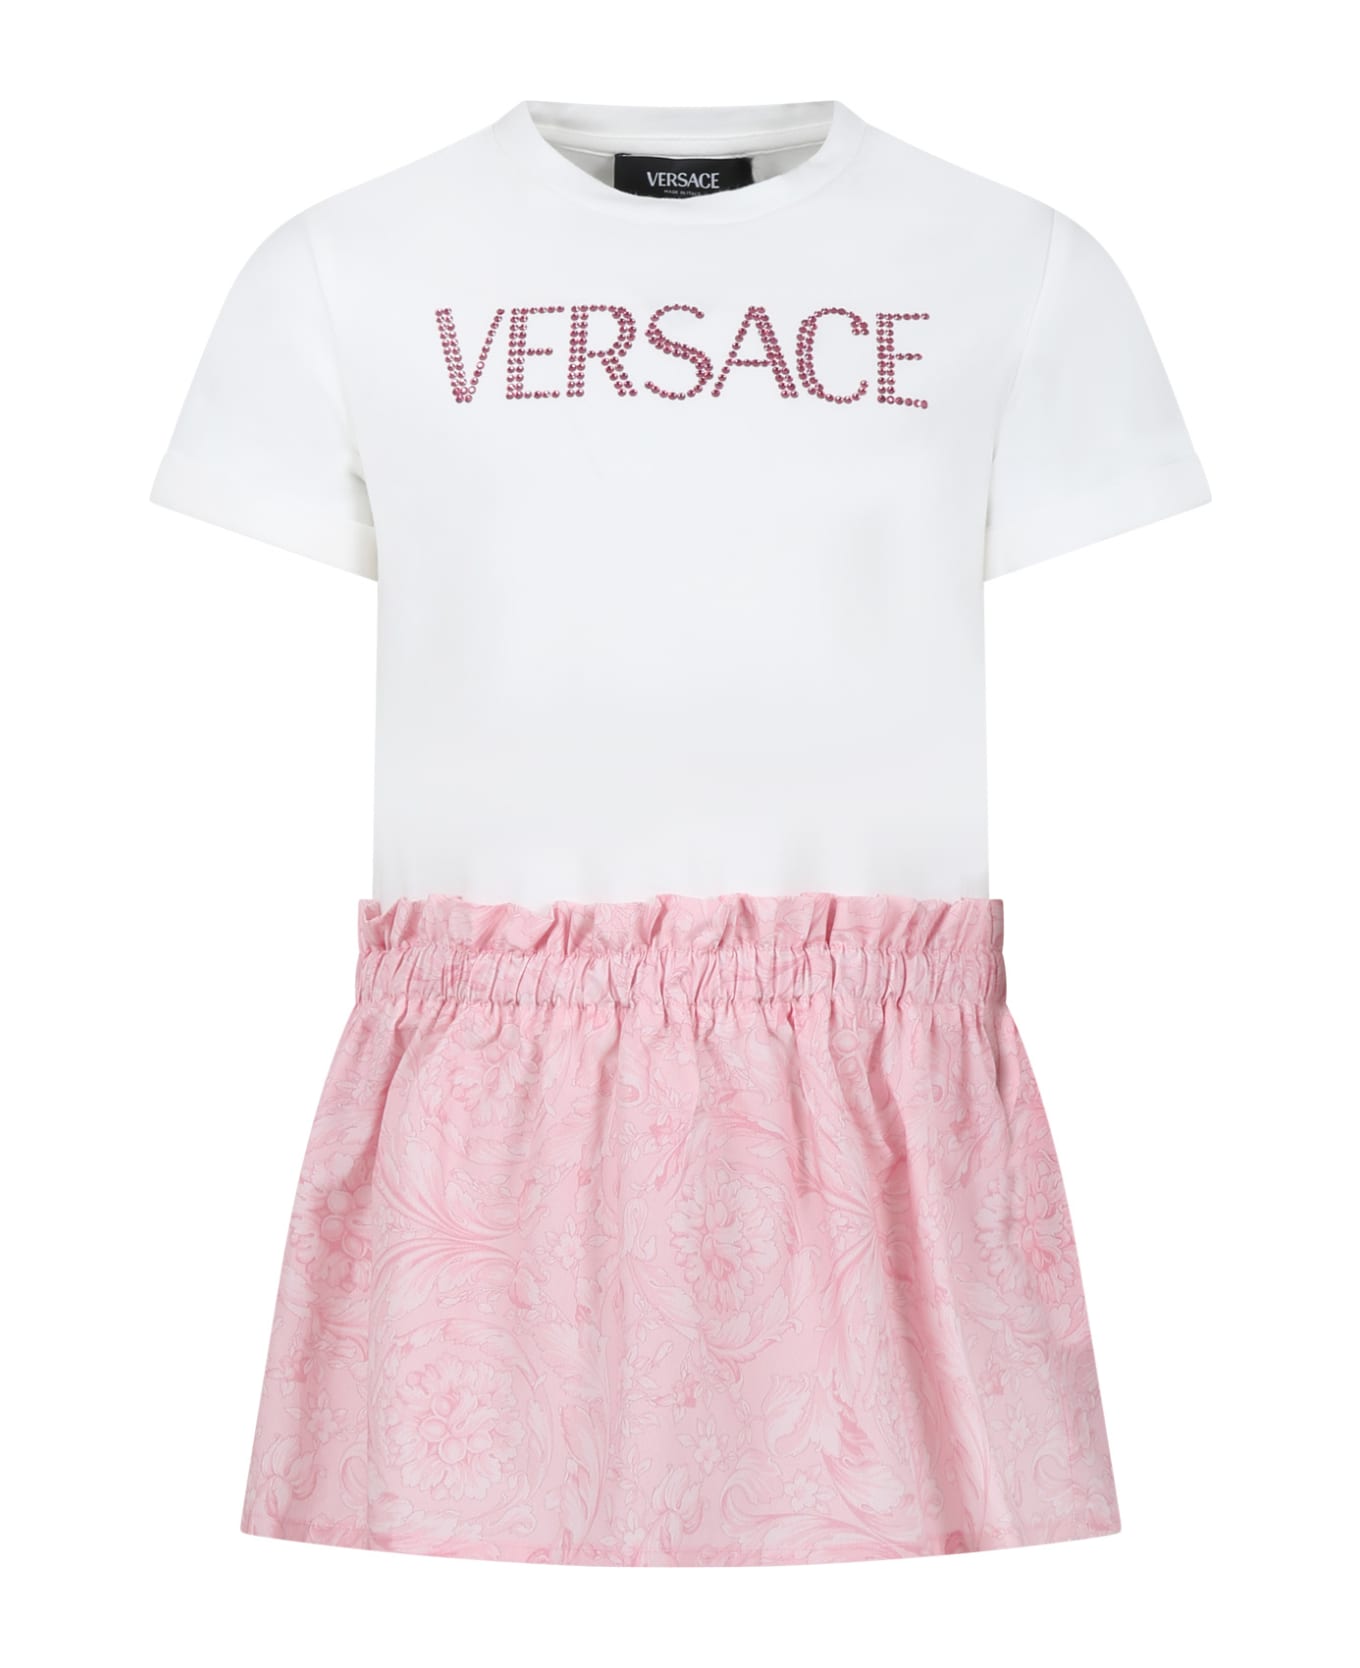 Versace Pink Dress For Girl With Baroque Print And Rhinestone Logo - Pink